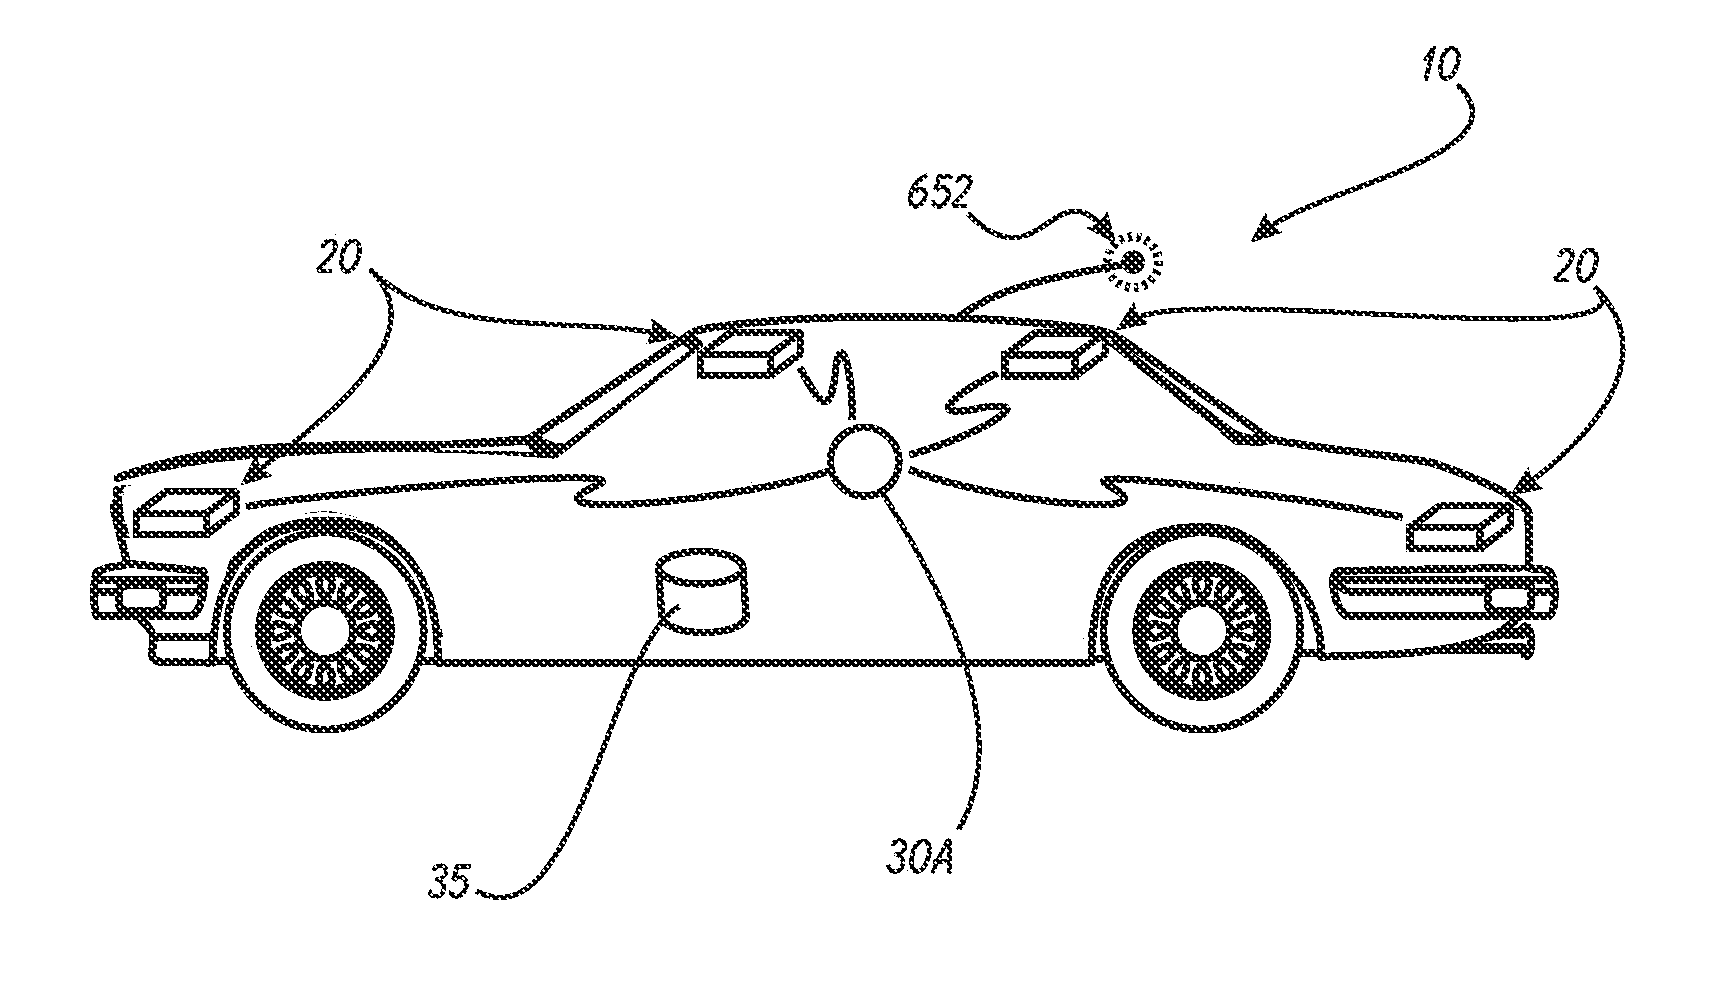 Driver risk assessment system and method having calibrating automatic event scoring